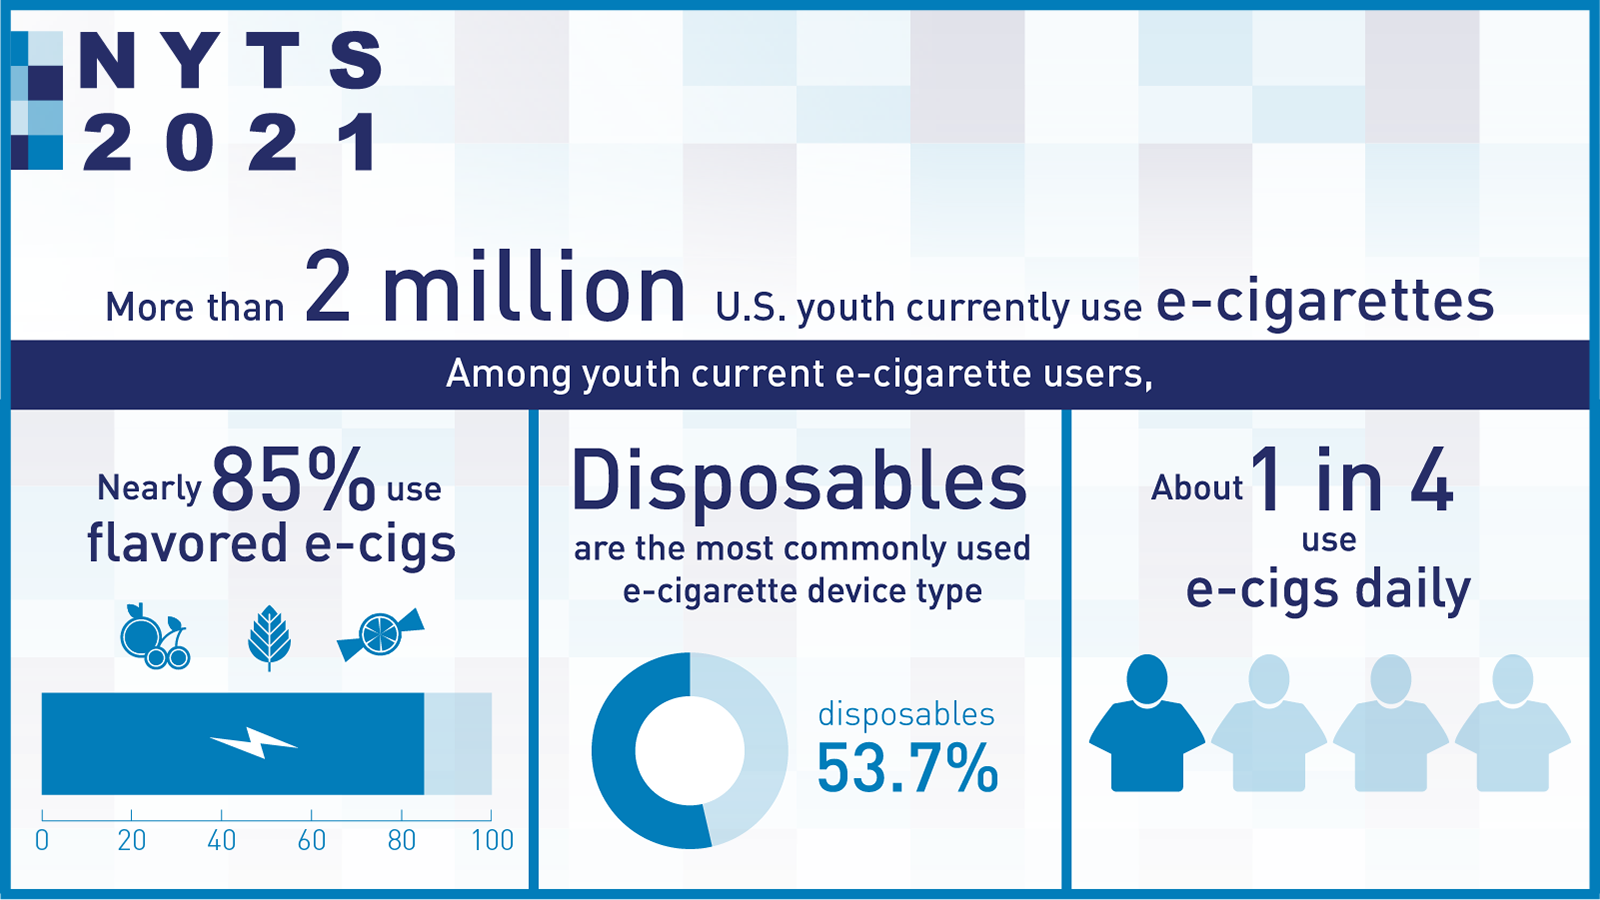 Results from the Annual National Youth Tobacco Survey - Summary Image